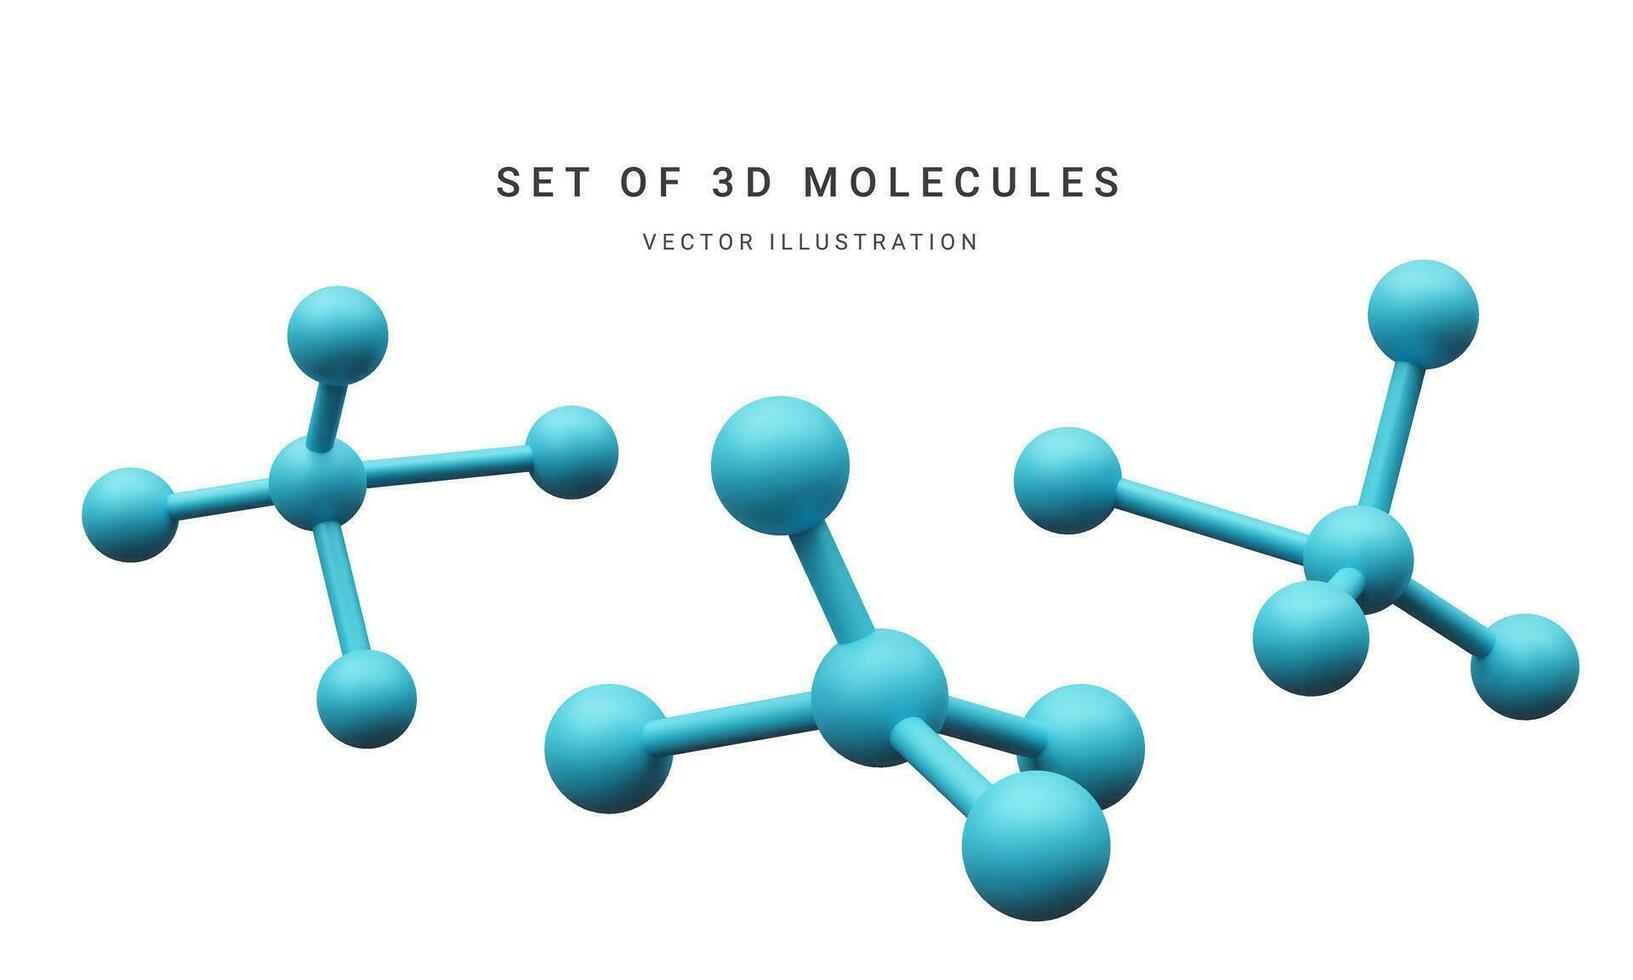 Set of 3d realistic abstract molecules isolated on white background. Medicine, biology, chemistry and science concept in cartoon style. Vector illustration